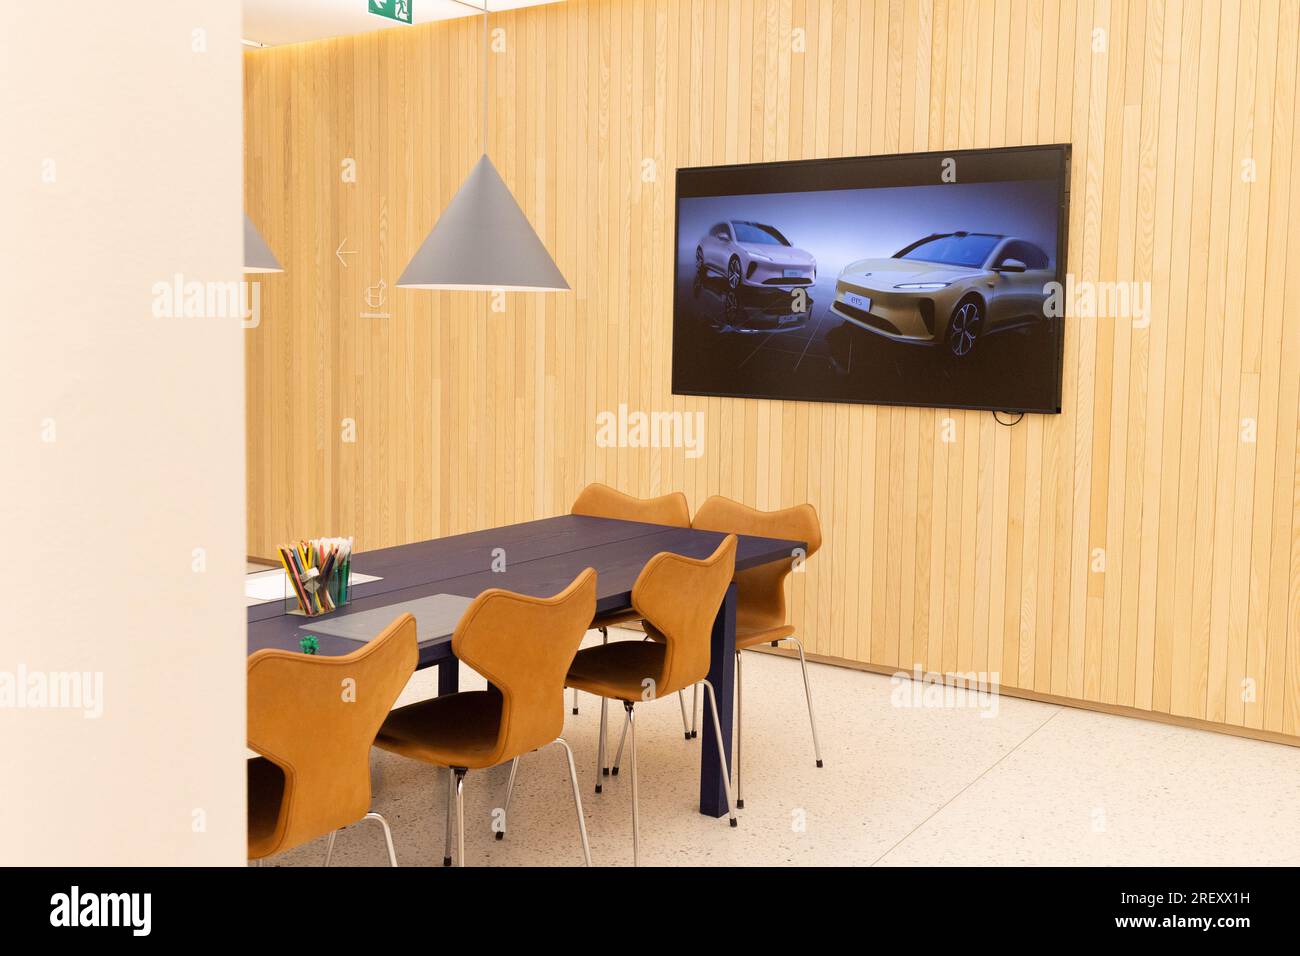 Oslo, Norway. July 27th, 2023. The NIO cafe and showroom in Oslo, Norway. Six EP9s have been sold to NIO investors for £2.5 million each. Credit: Katie Collins/Alamy Stock Photo